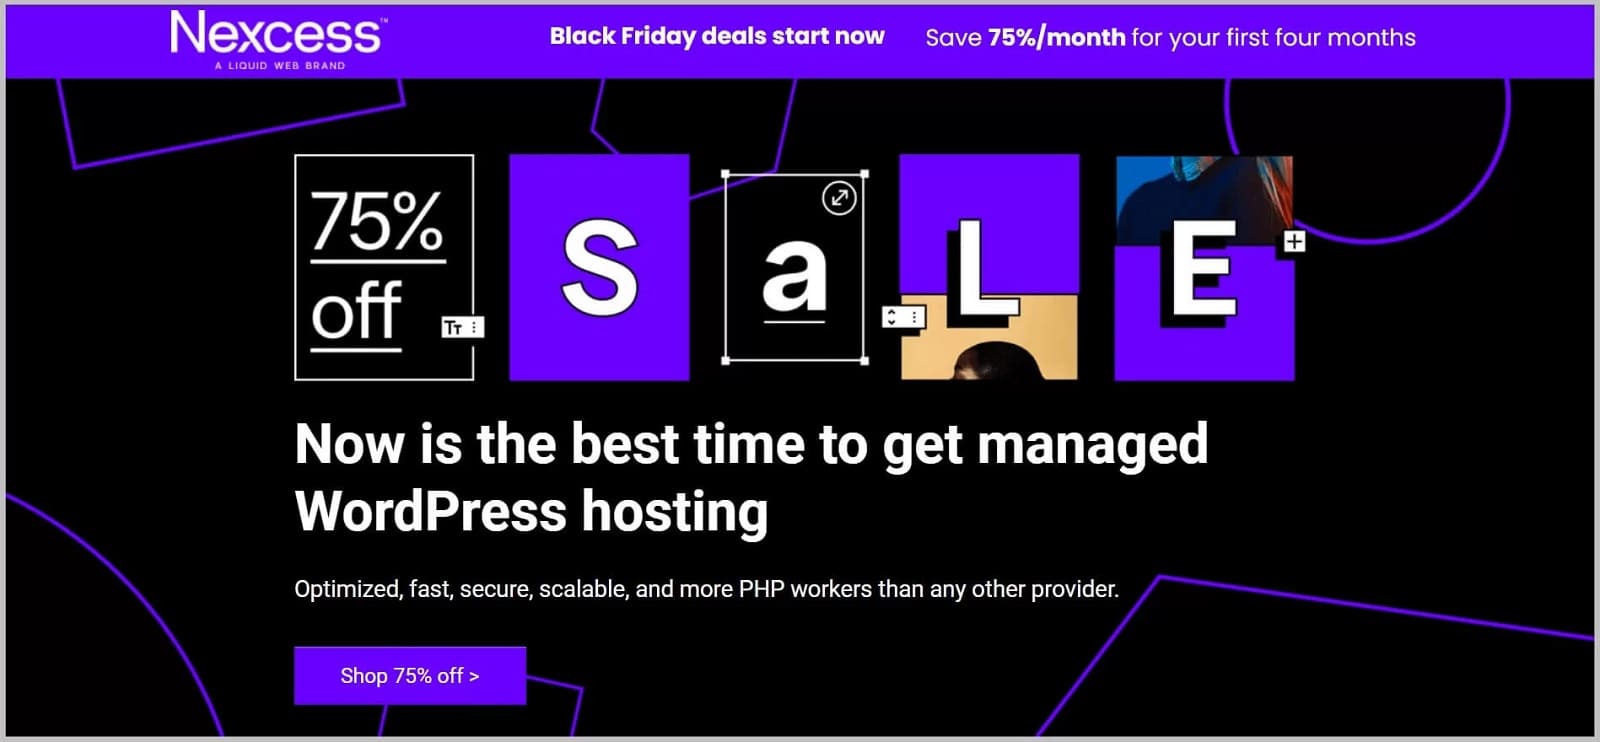 Nexcess Black Friday Sale is Here!